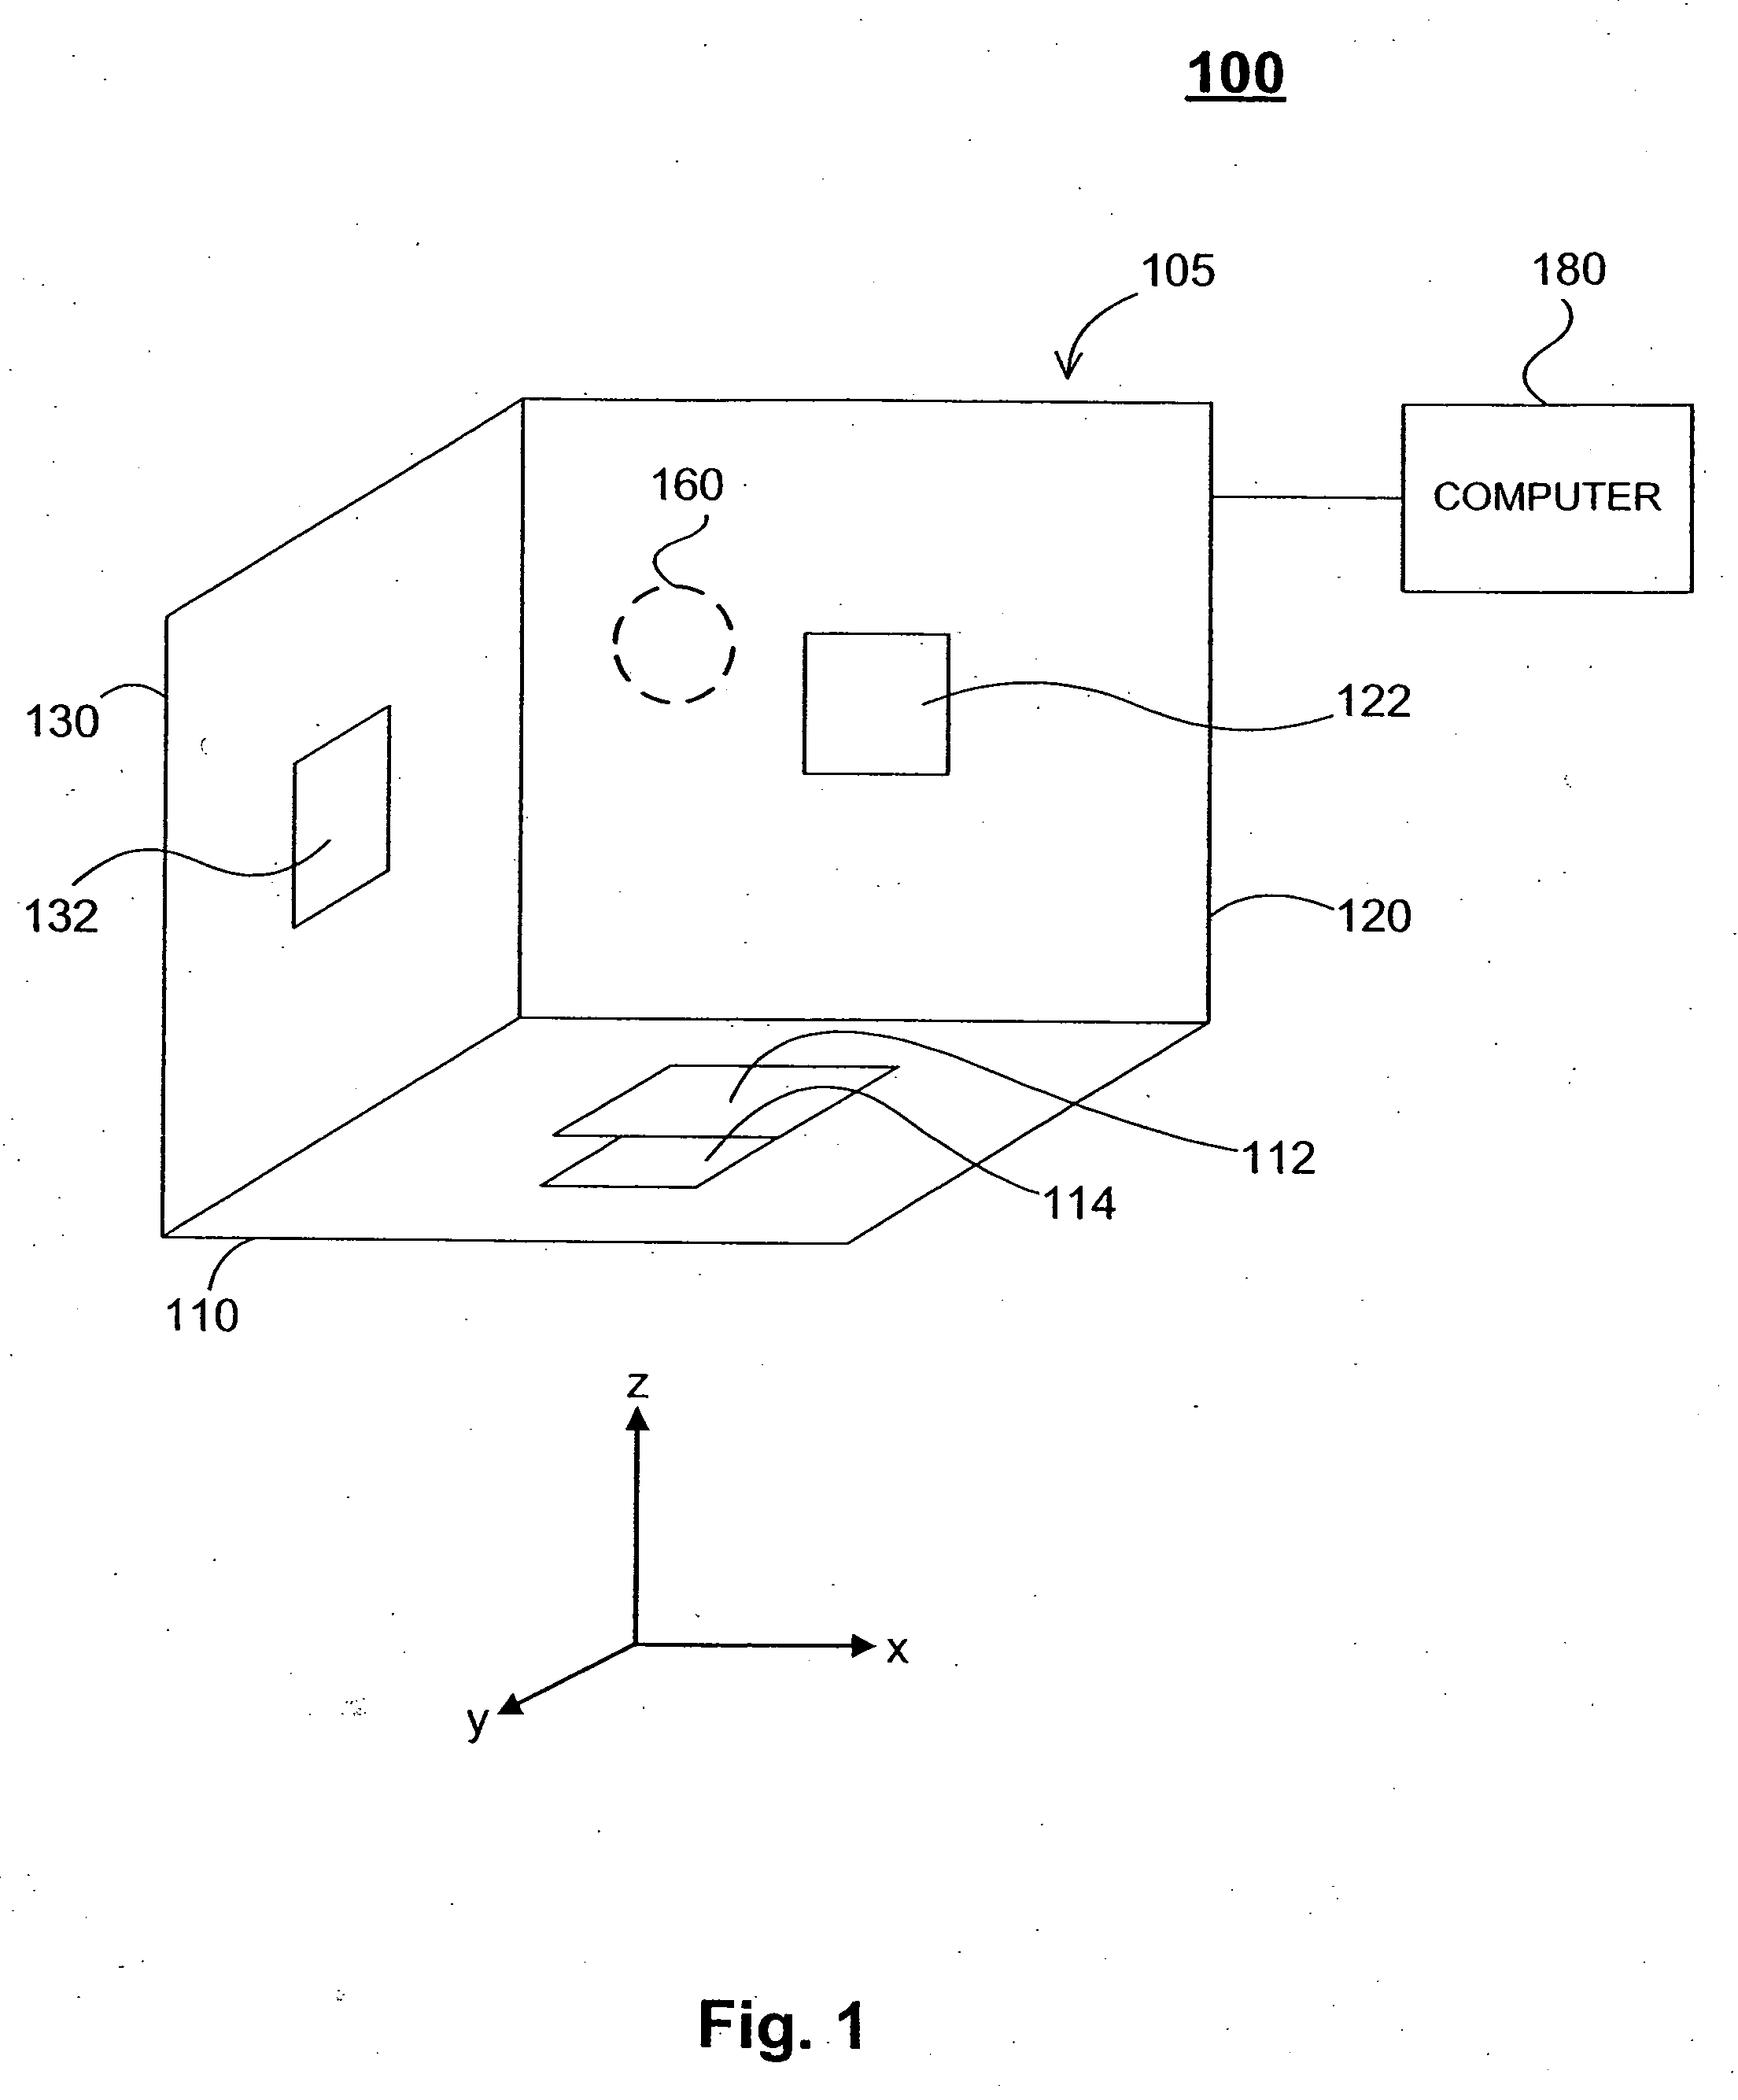 System and method for using magnetic sensors to track the position of an object